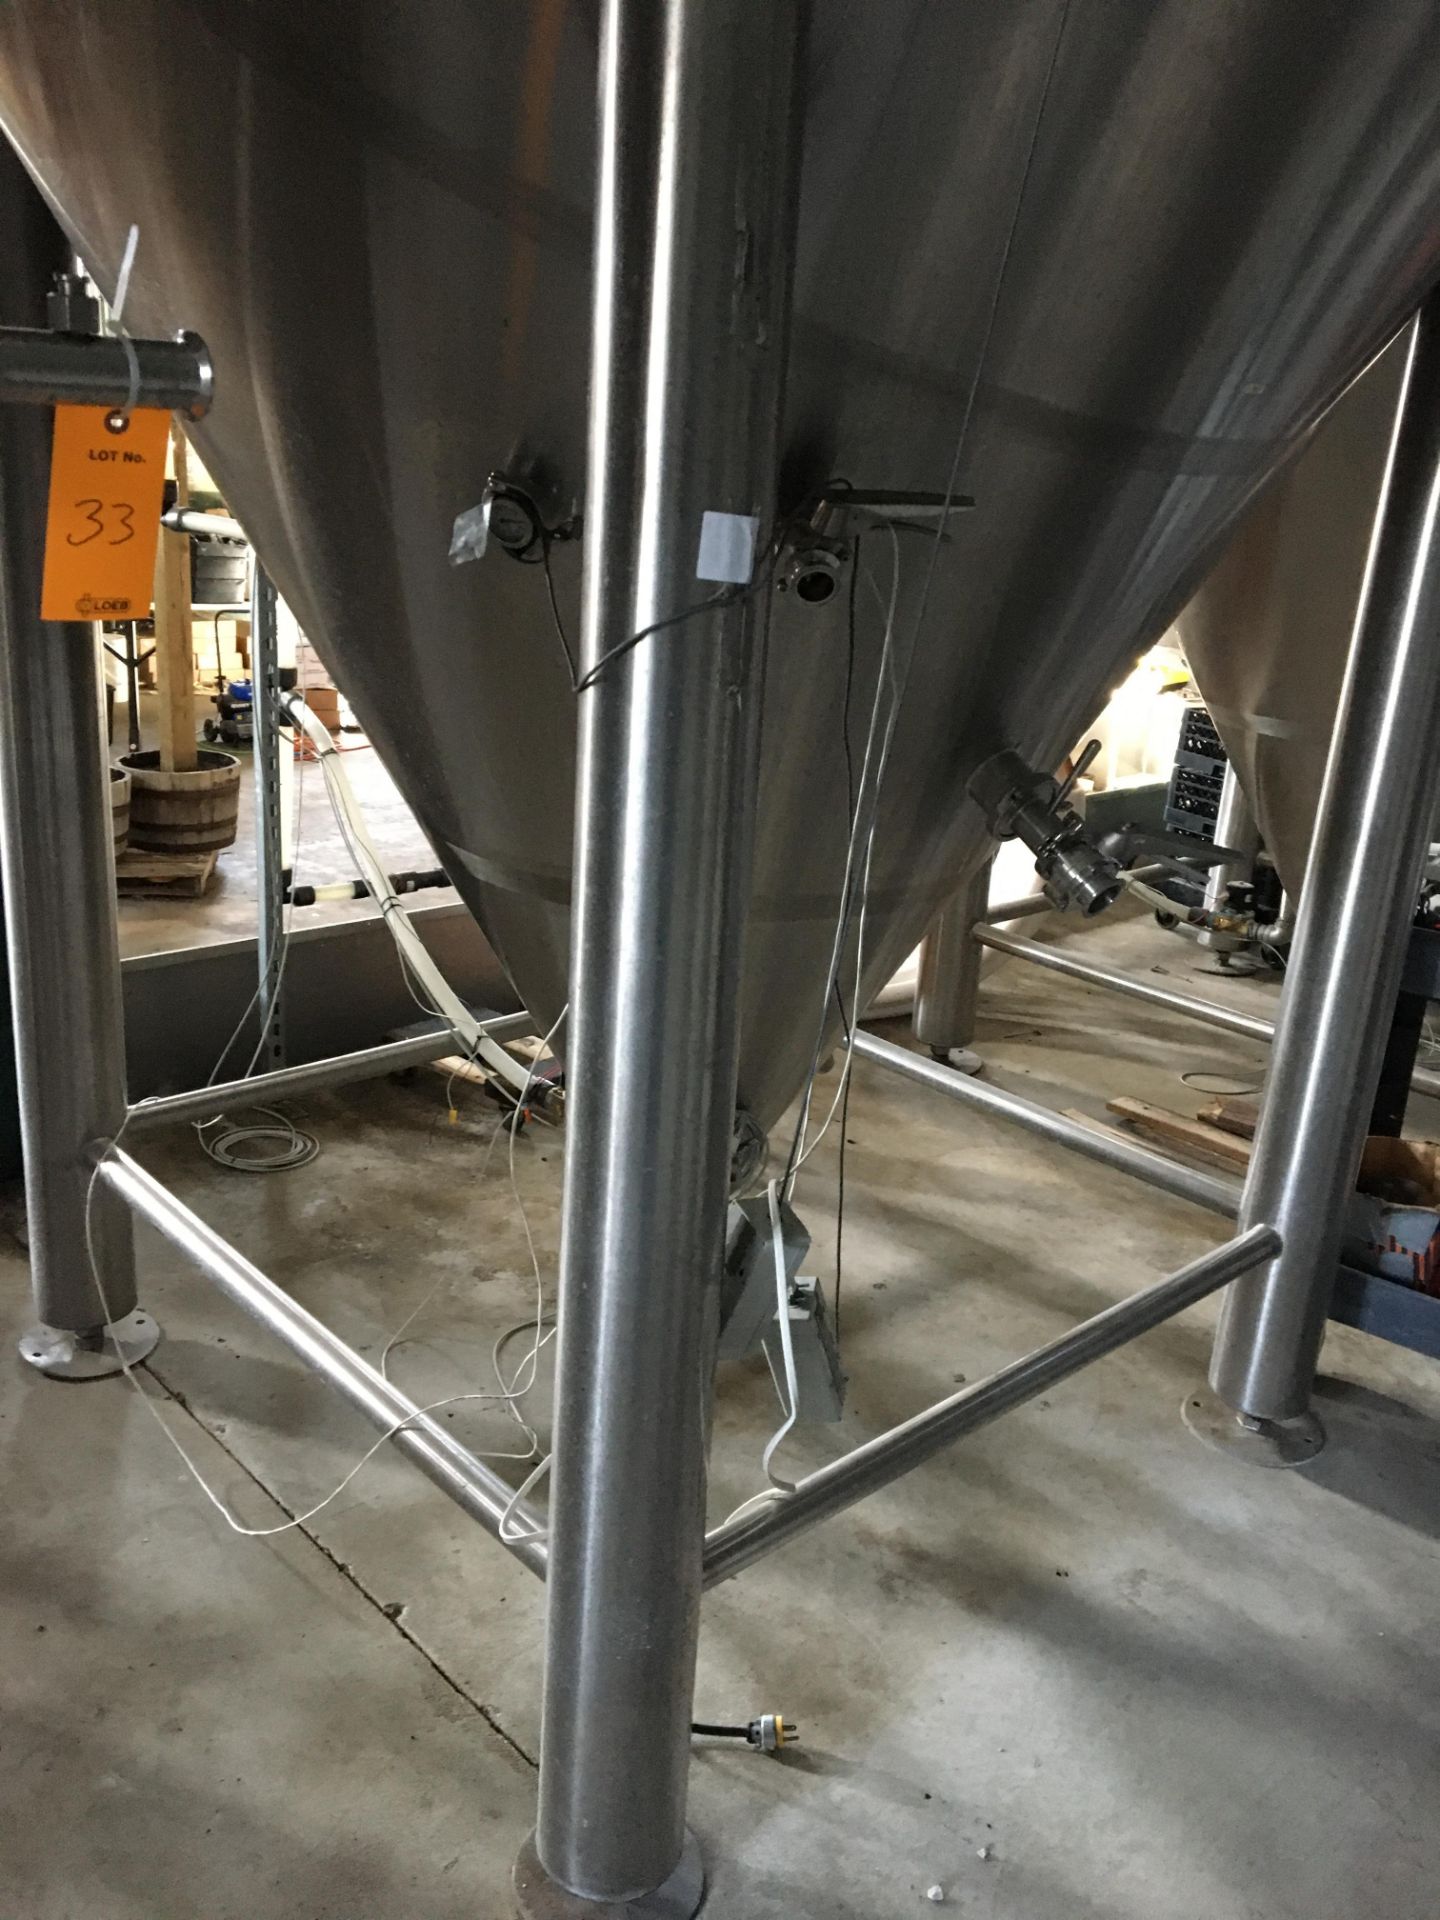 80-BBL Minnetonka Fermentation Tank, Model 80-BBL, Year 2017, Stainless Steel; Vessel store wort and - Image 8 of 15